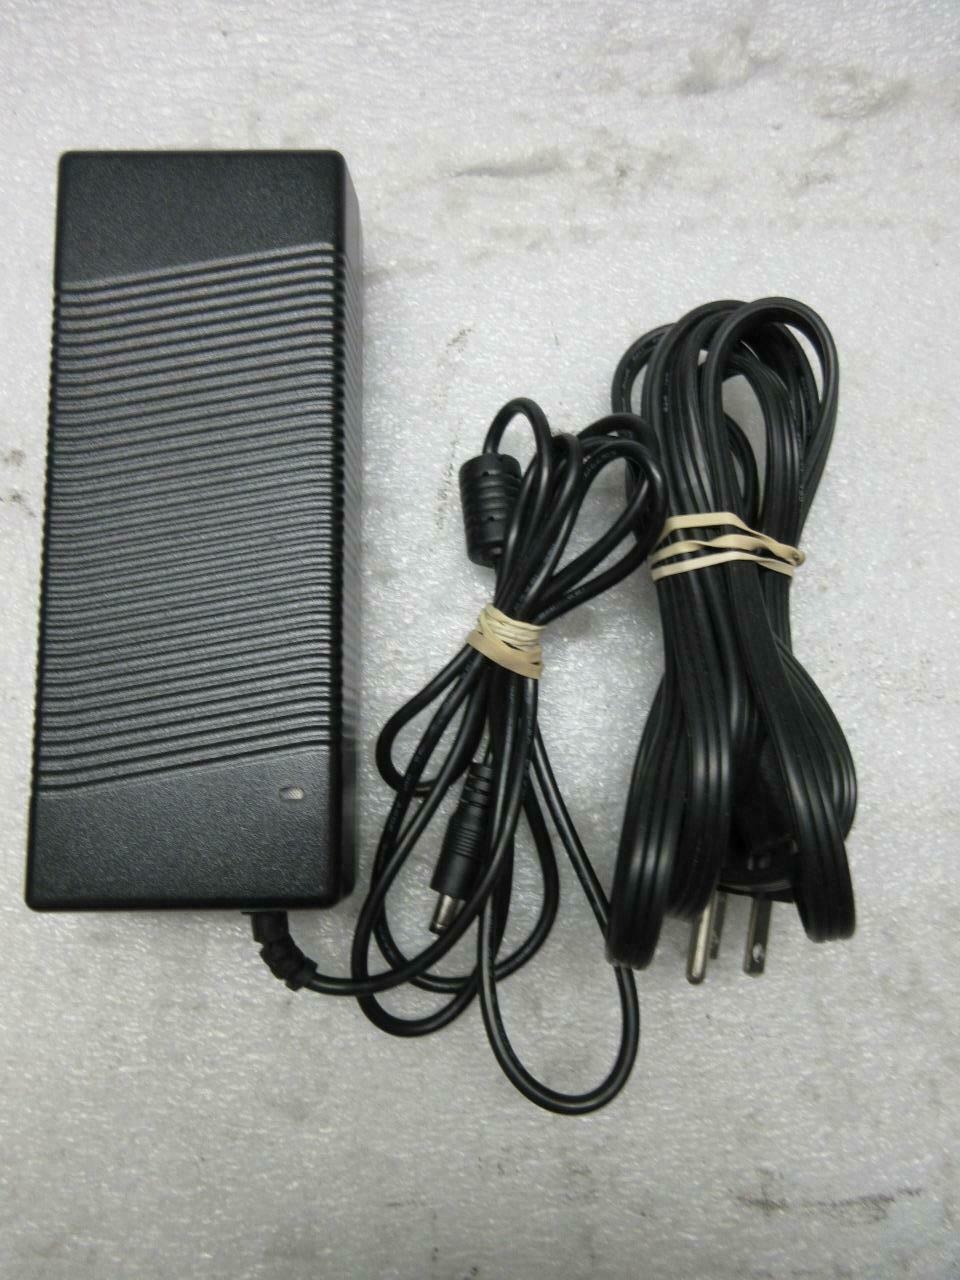 LHV STD-24050 Adapter Tech AC Adapter Power Supply Model 24V -- 5A w/ Power Cord Brand: LHV Type: Power Adapter Colo